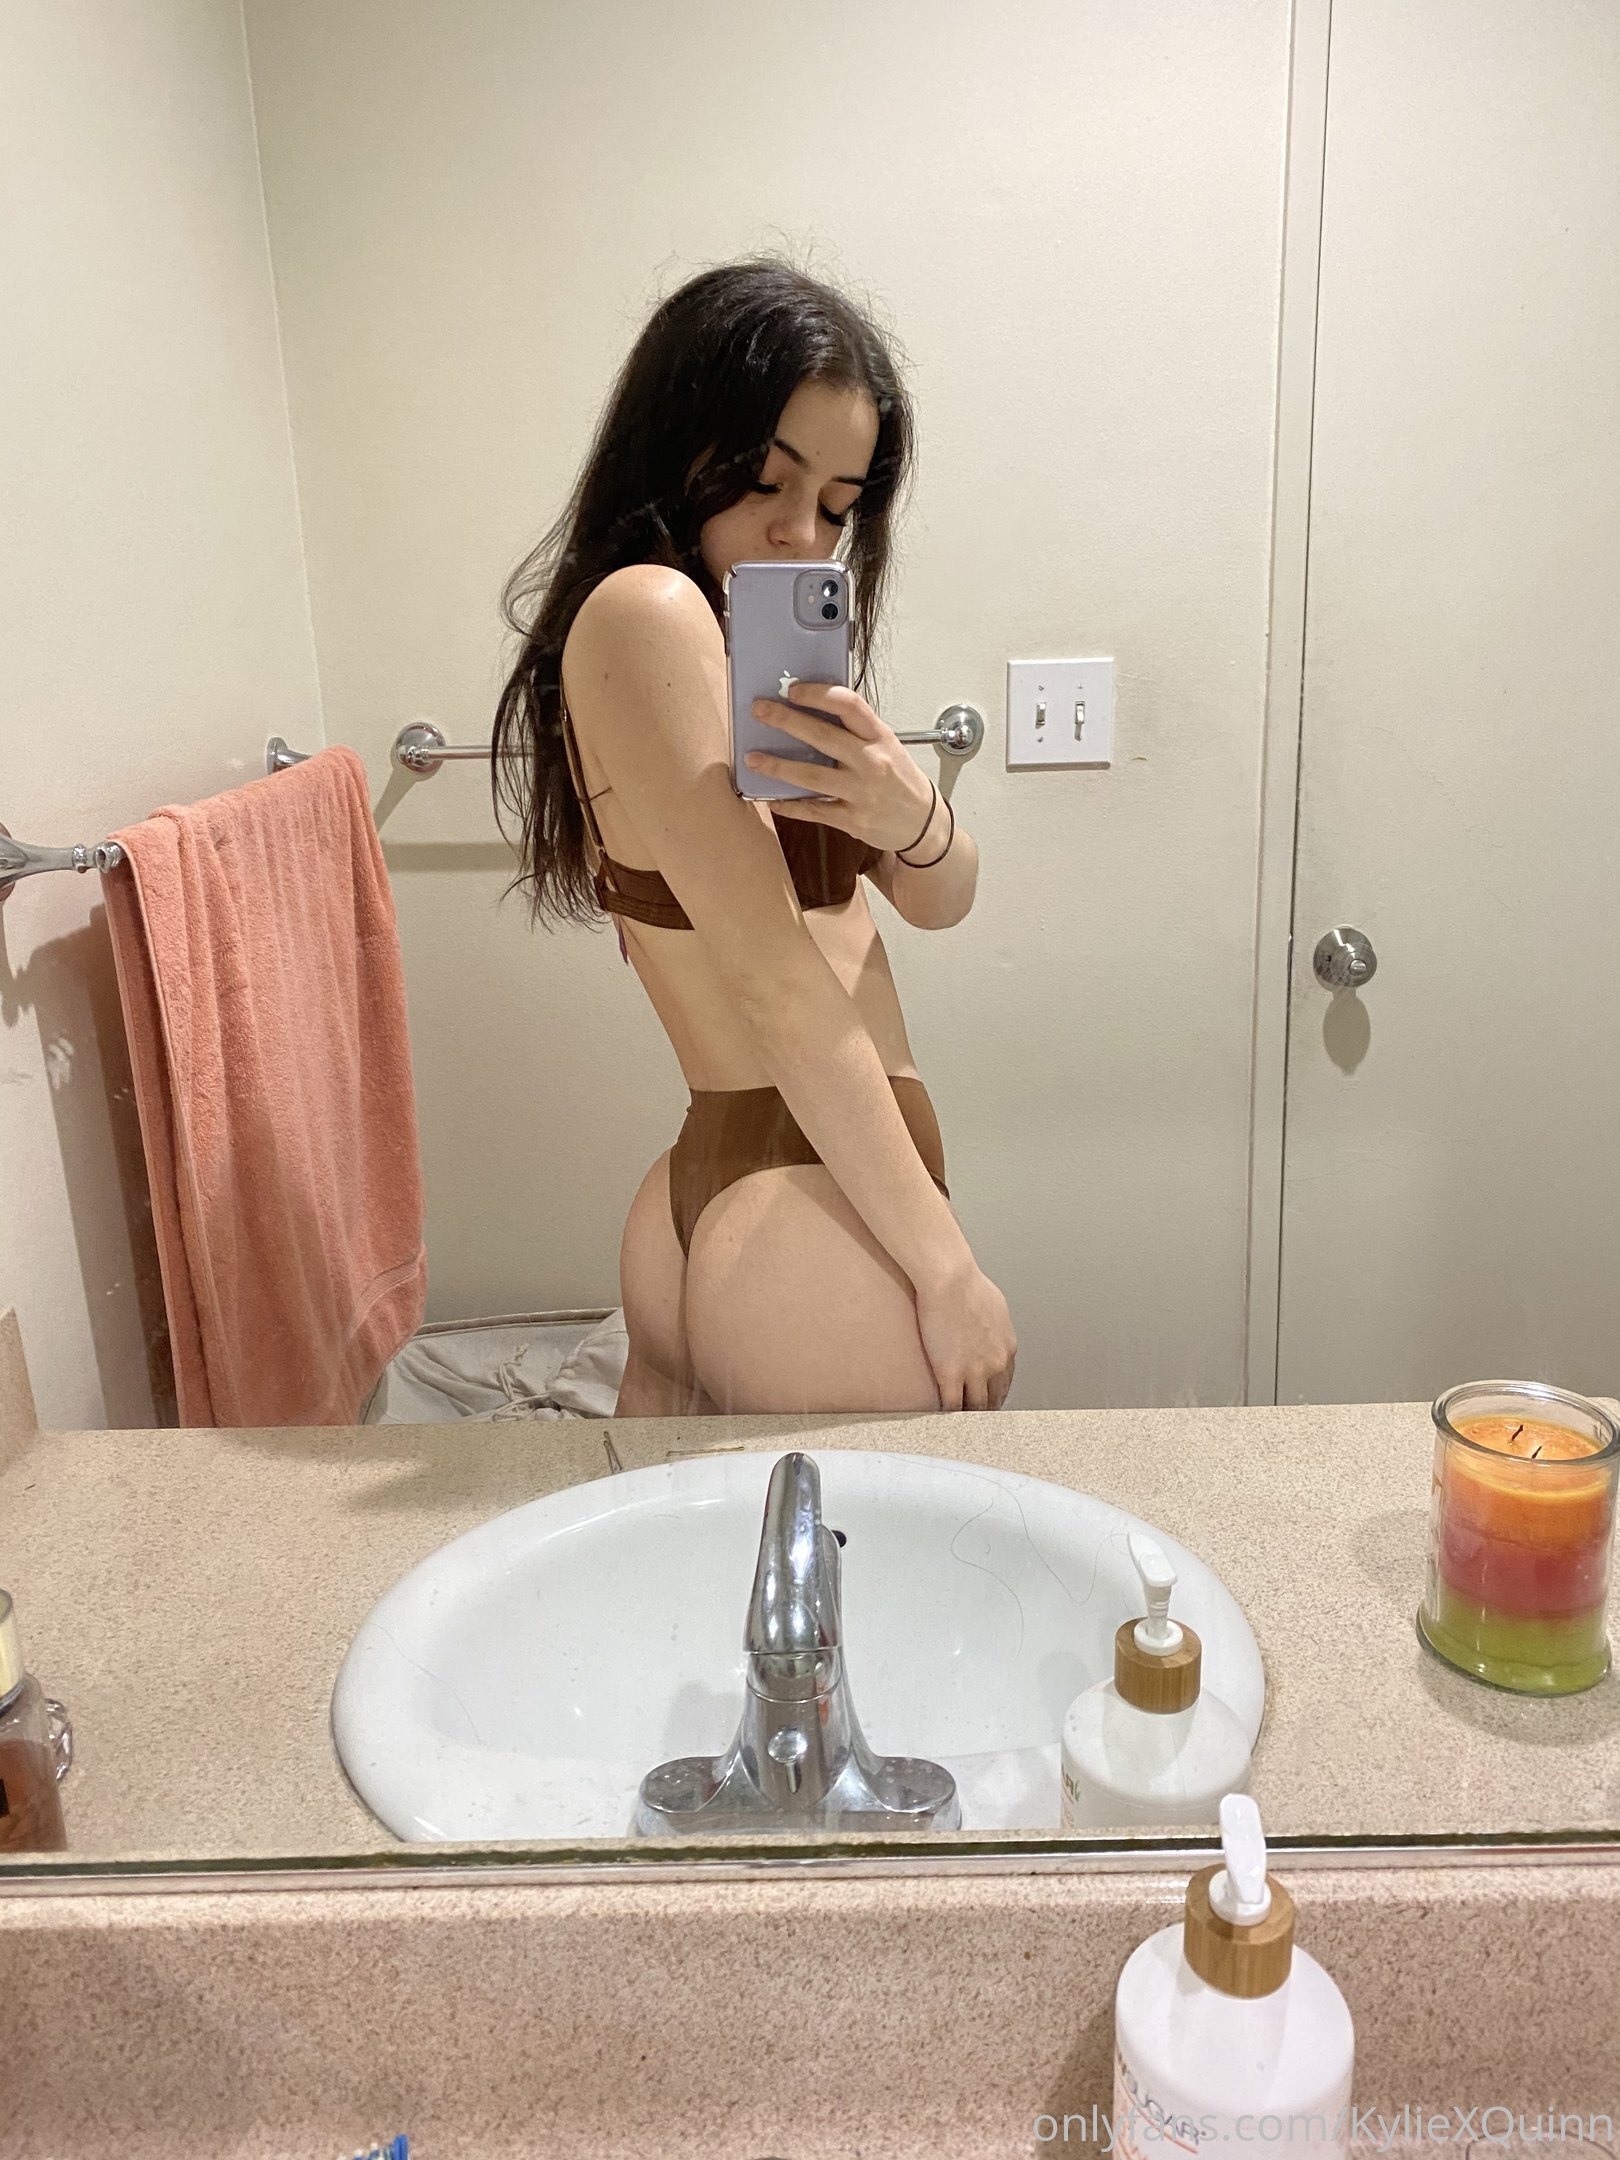 Kylie Xy, Kyliexquinn, Onlyfans 0050